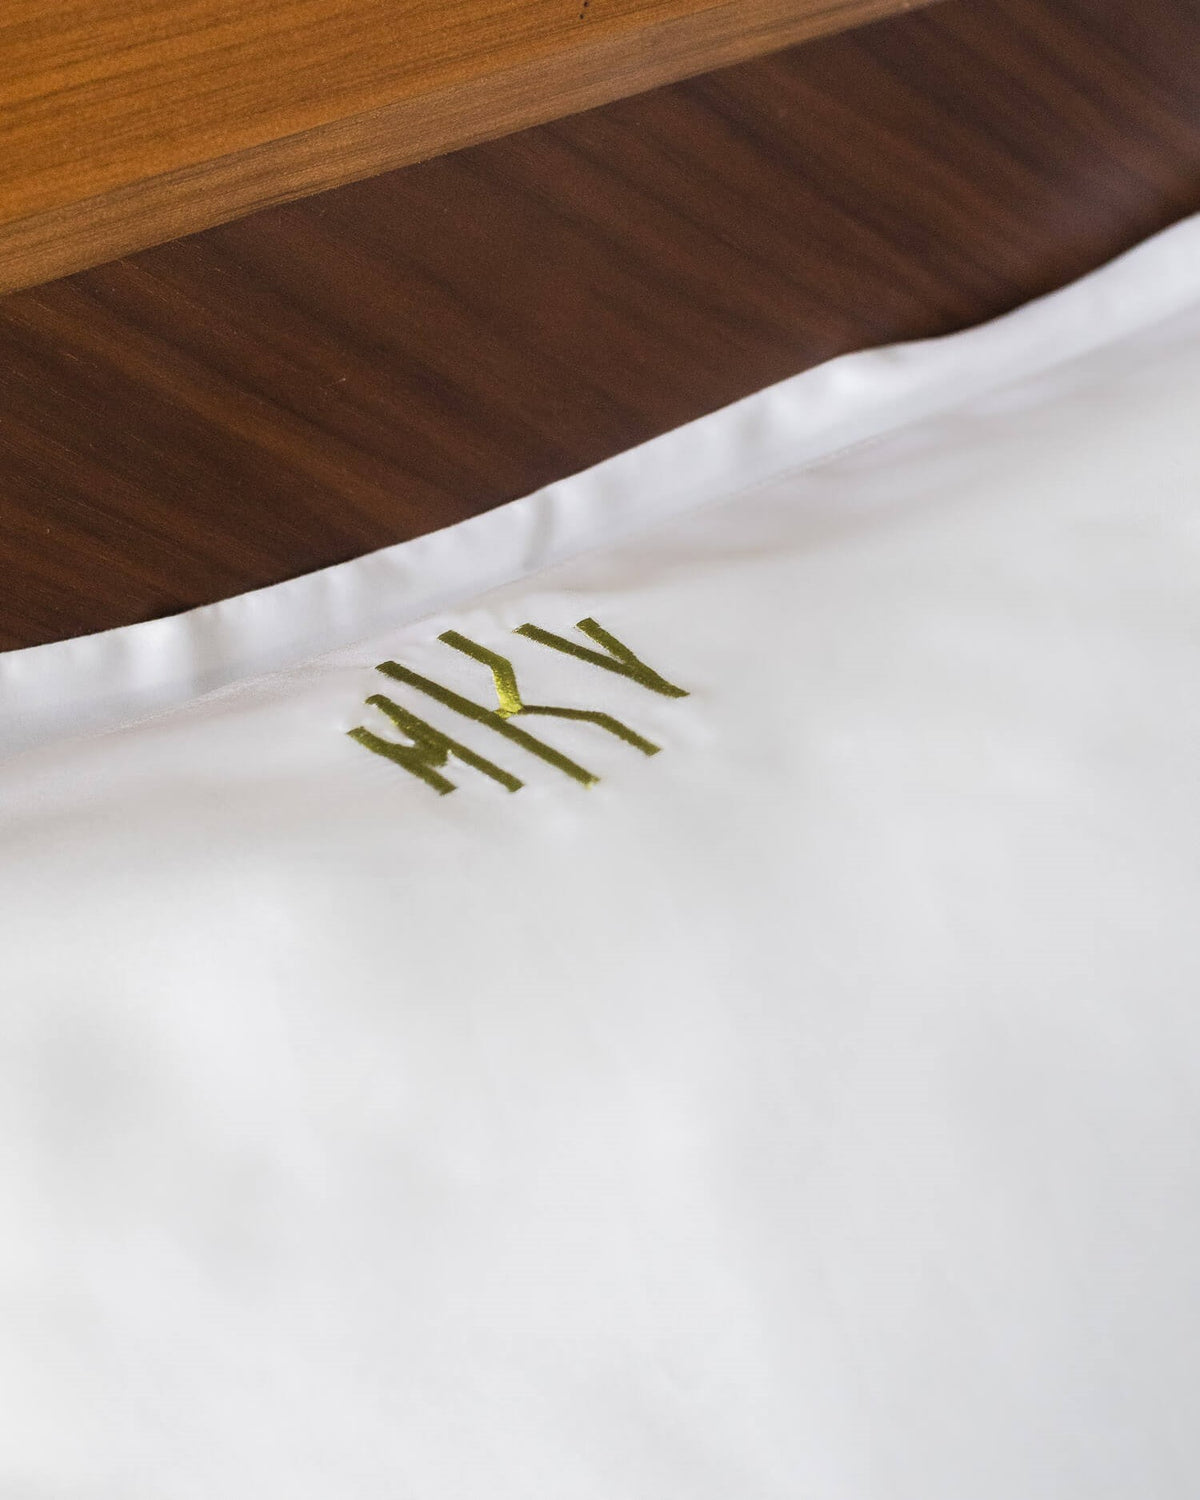 ava and ava ph organic bamboo lyocell pillowcases with monogrammed initials name embroidery